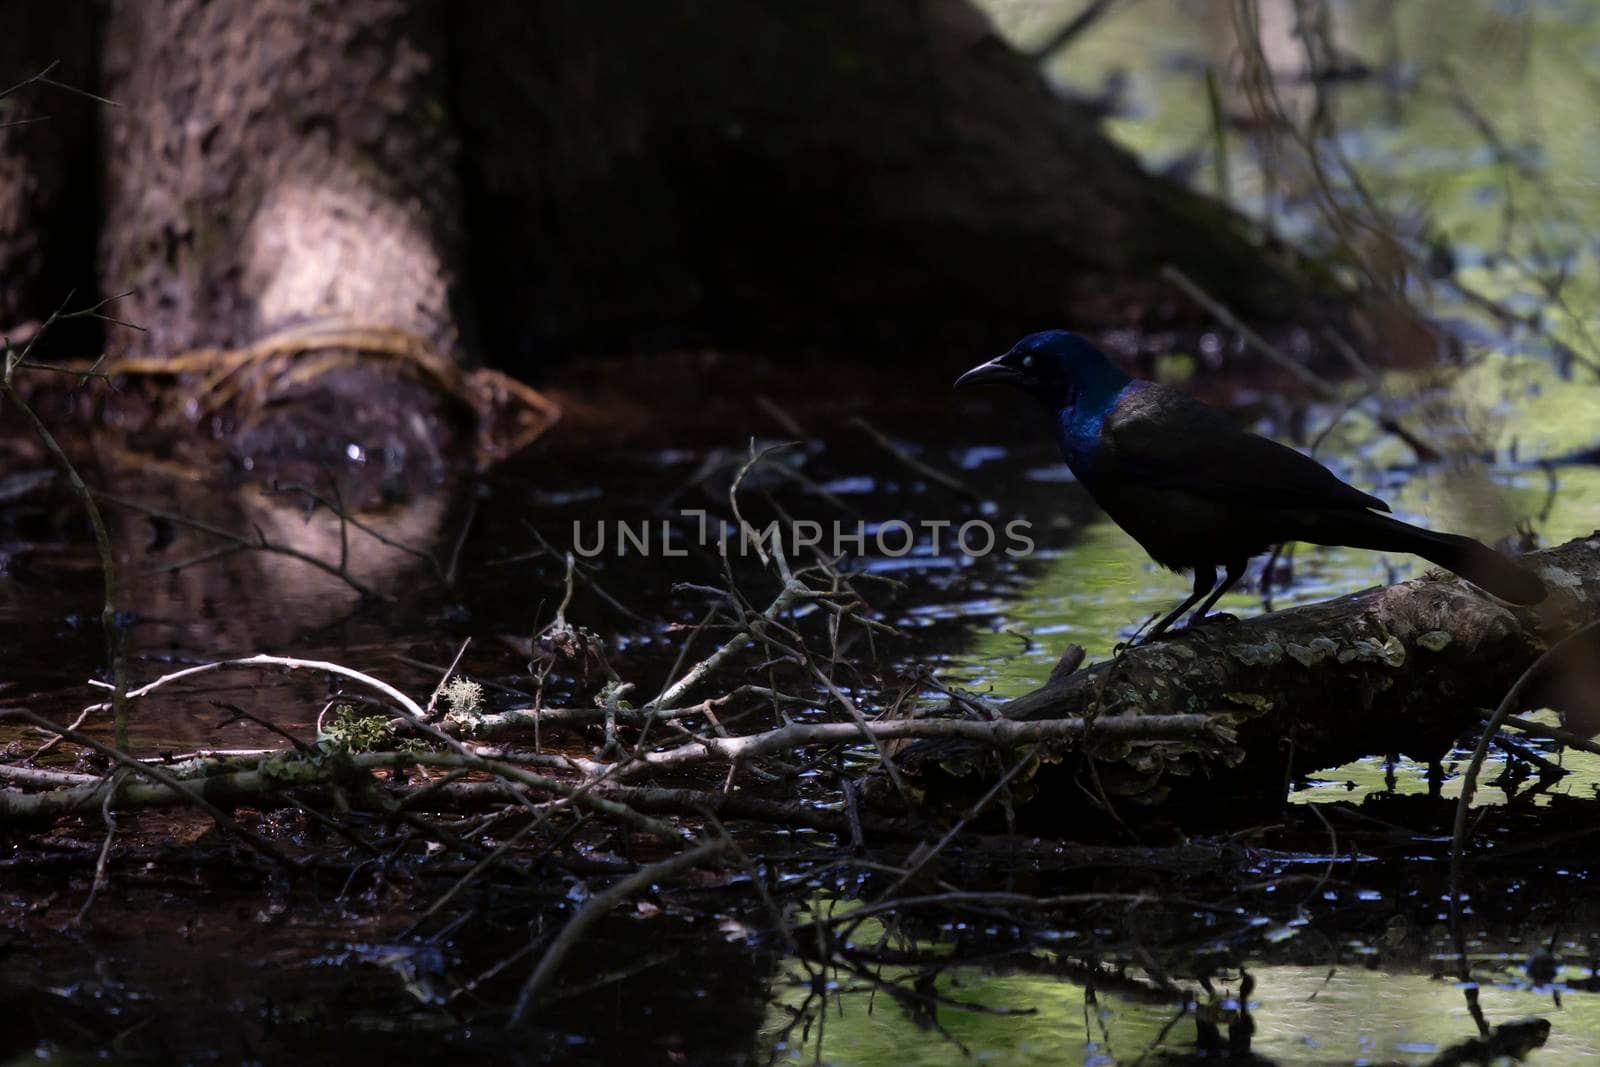 Common grackle watching the water in front of it for food